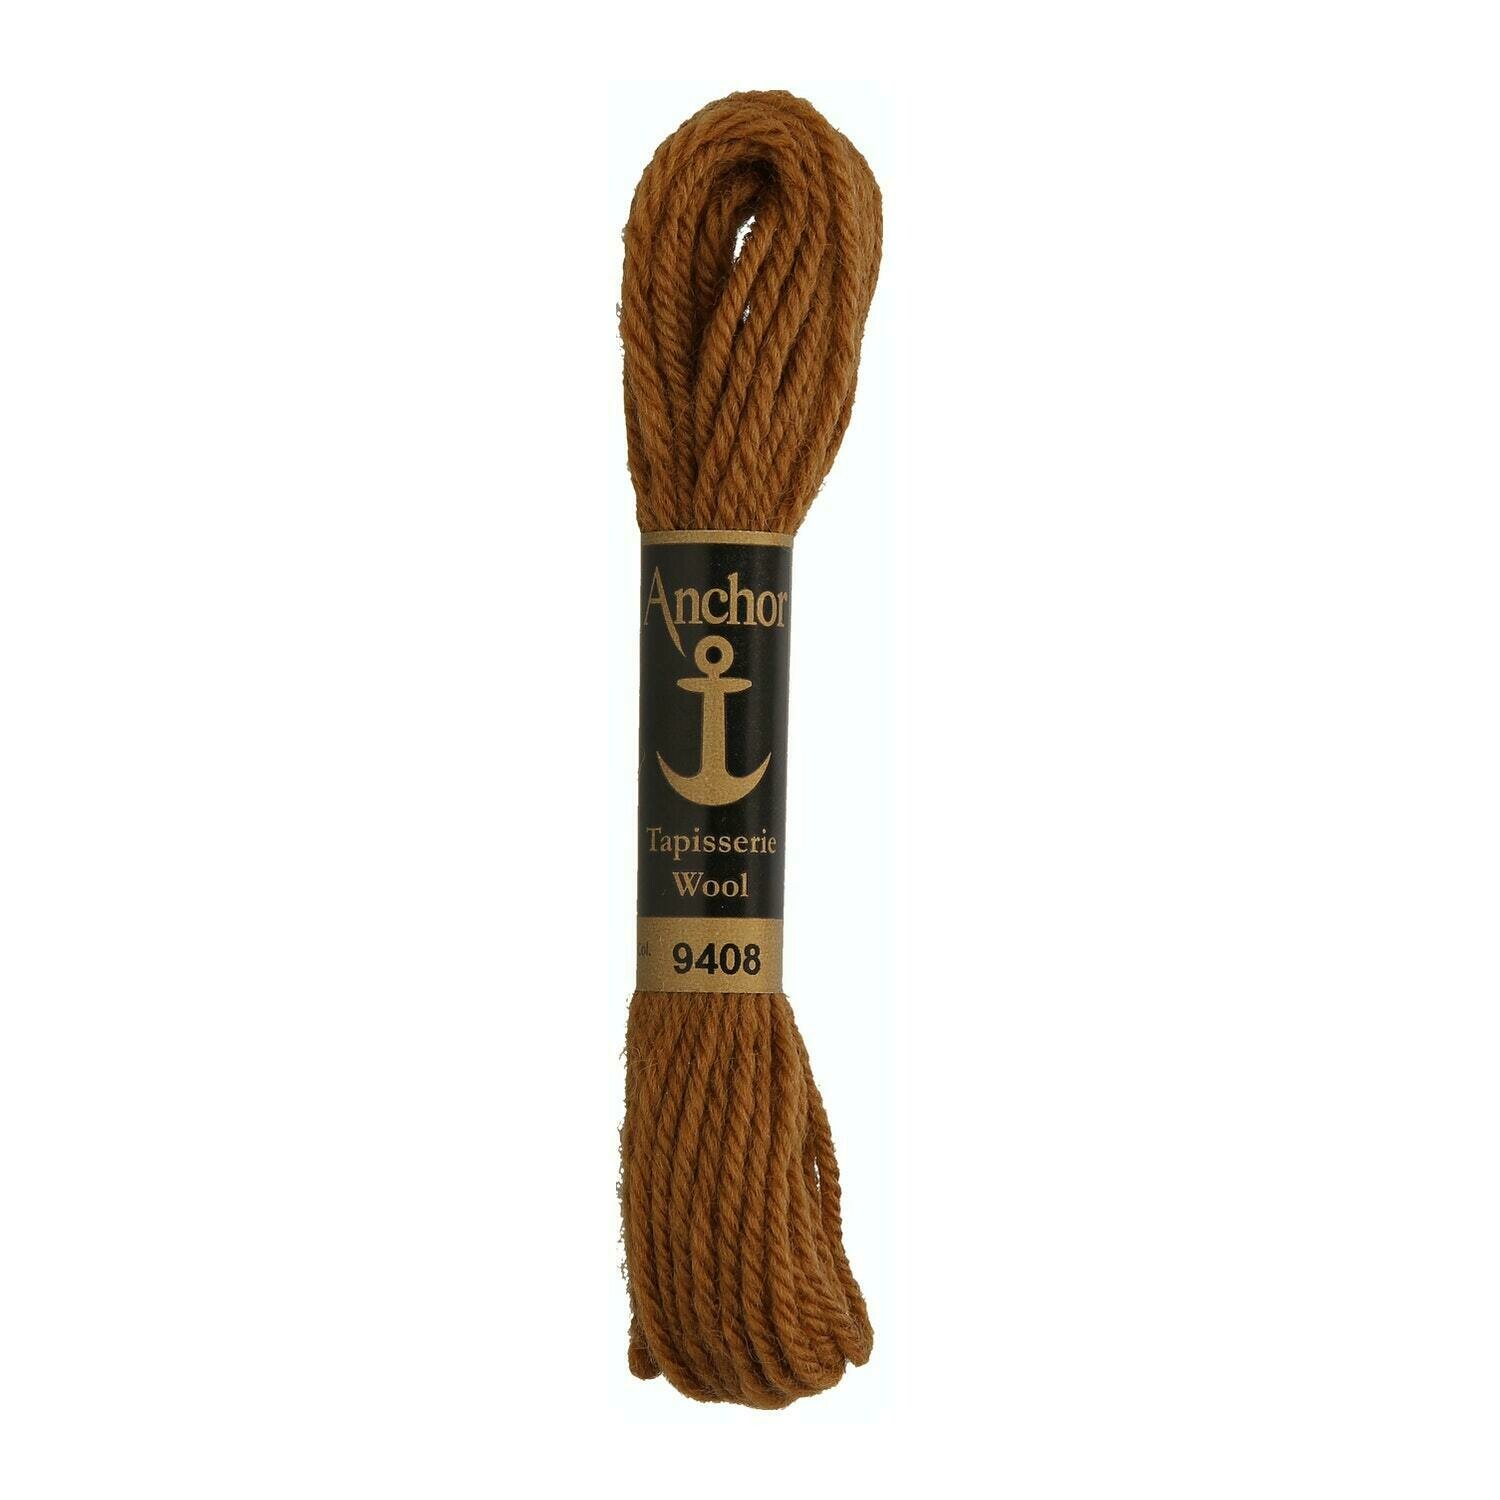 Anchor Tapisserie Wool #09408